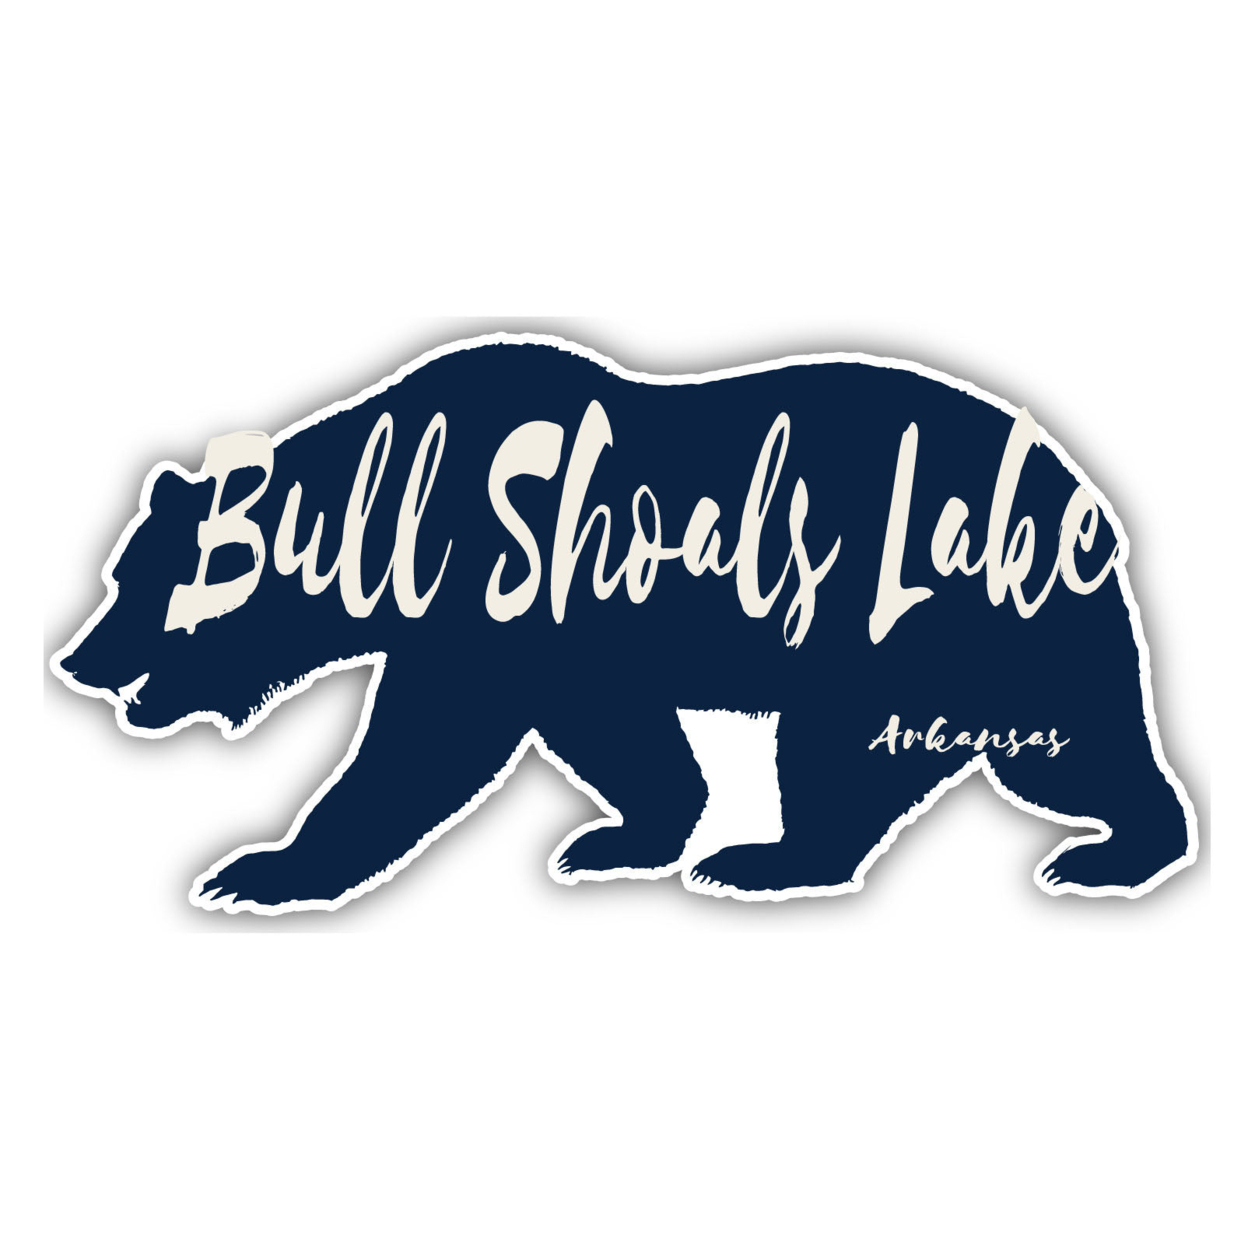 Bull Shoals Lake Arkansas Souvenir Decorative Stickers (Choose Theme And Size) - 4-Pack, 4-Inch, Camp Life